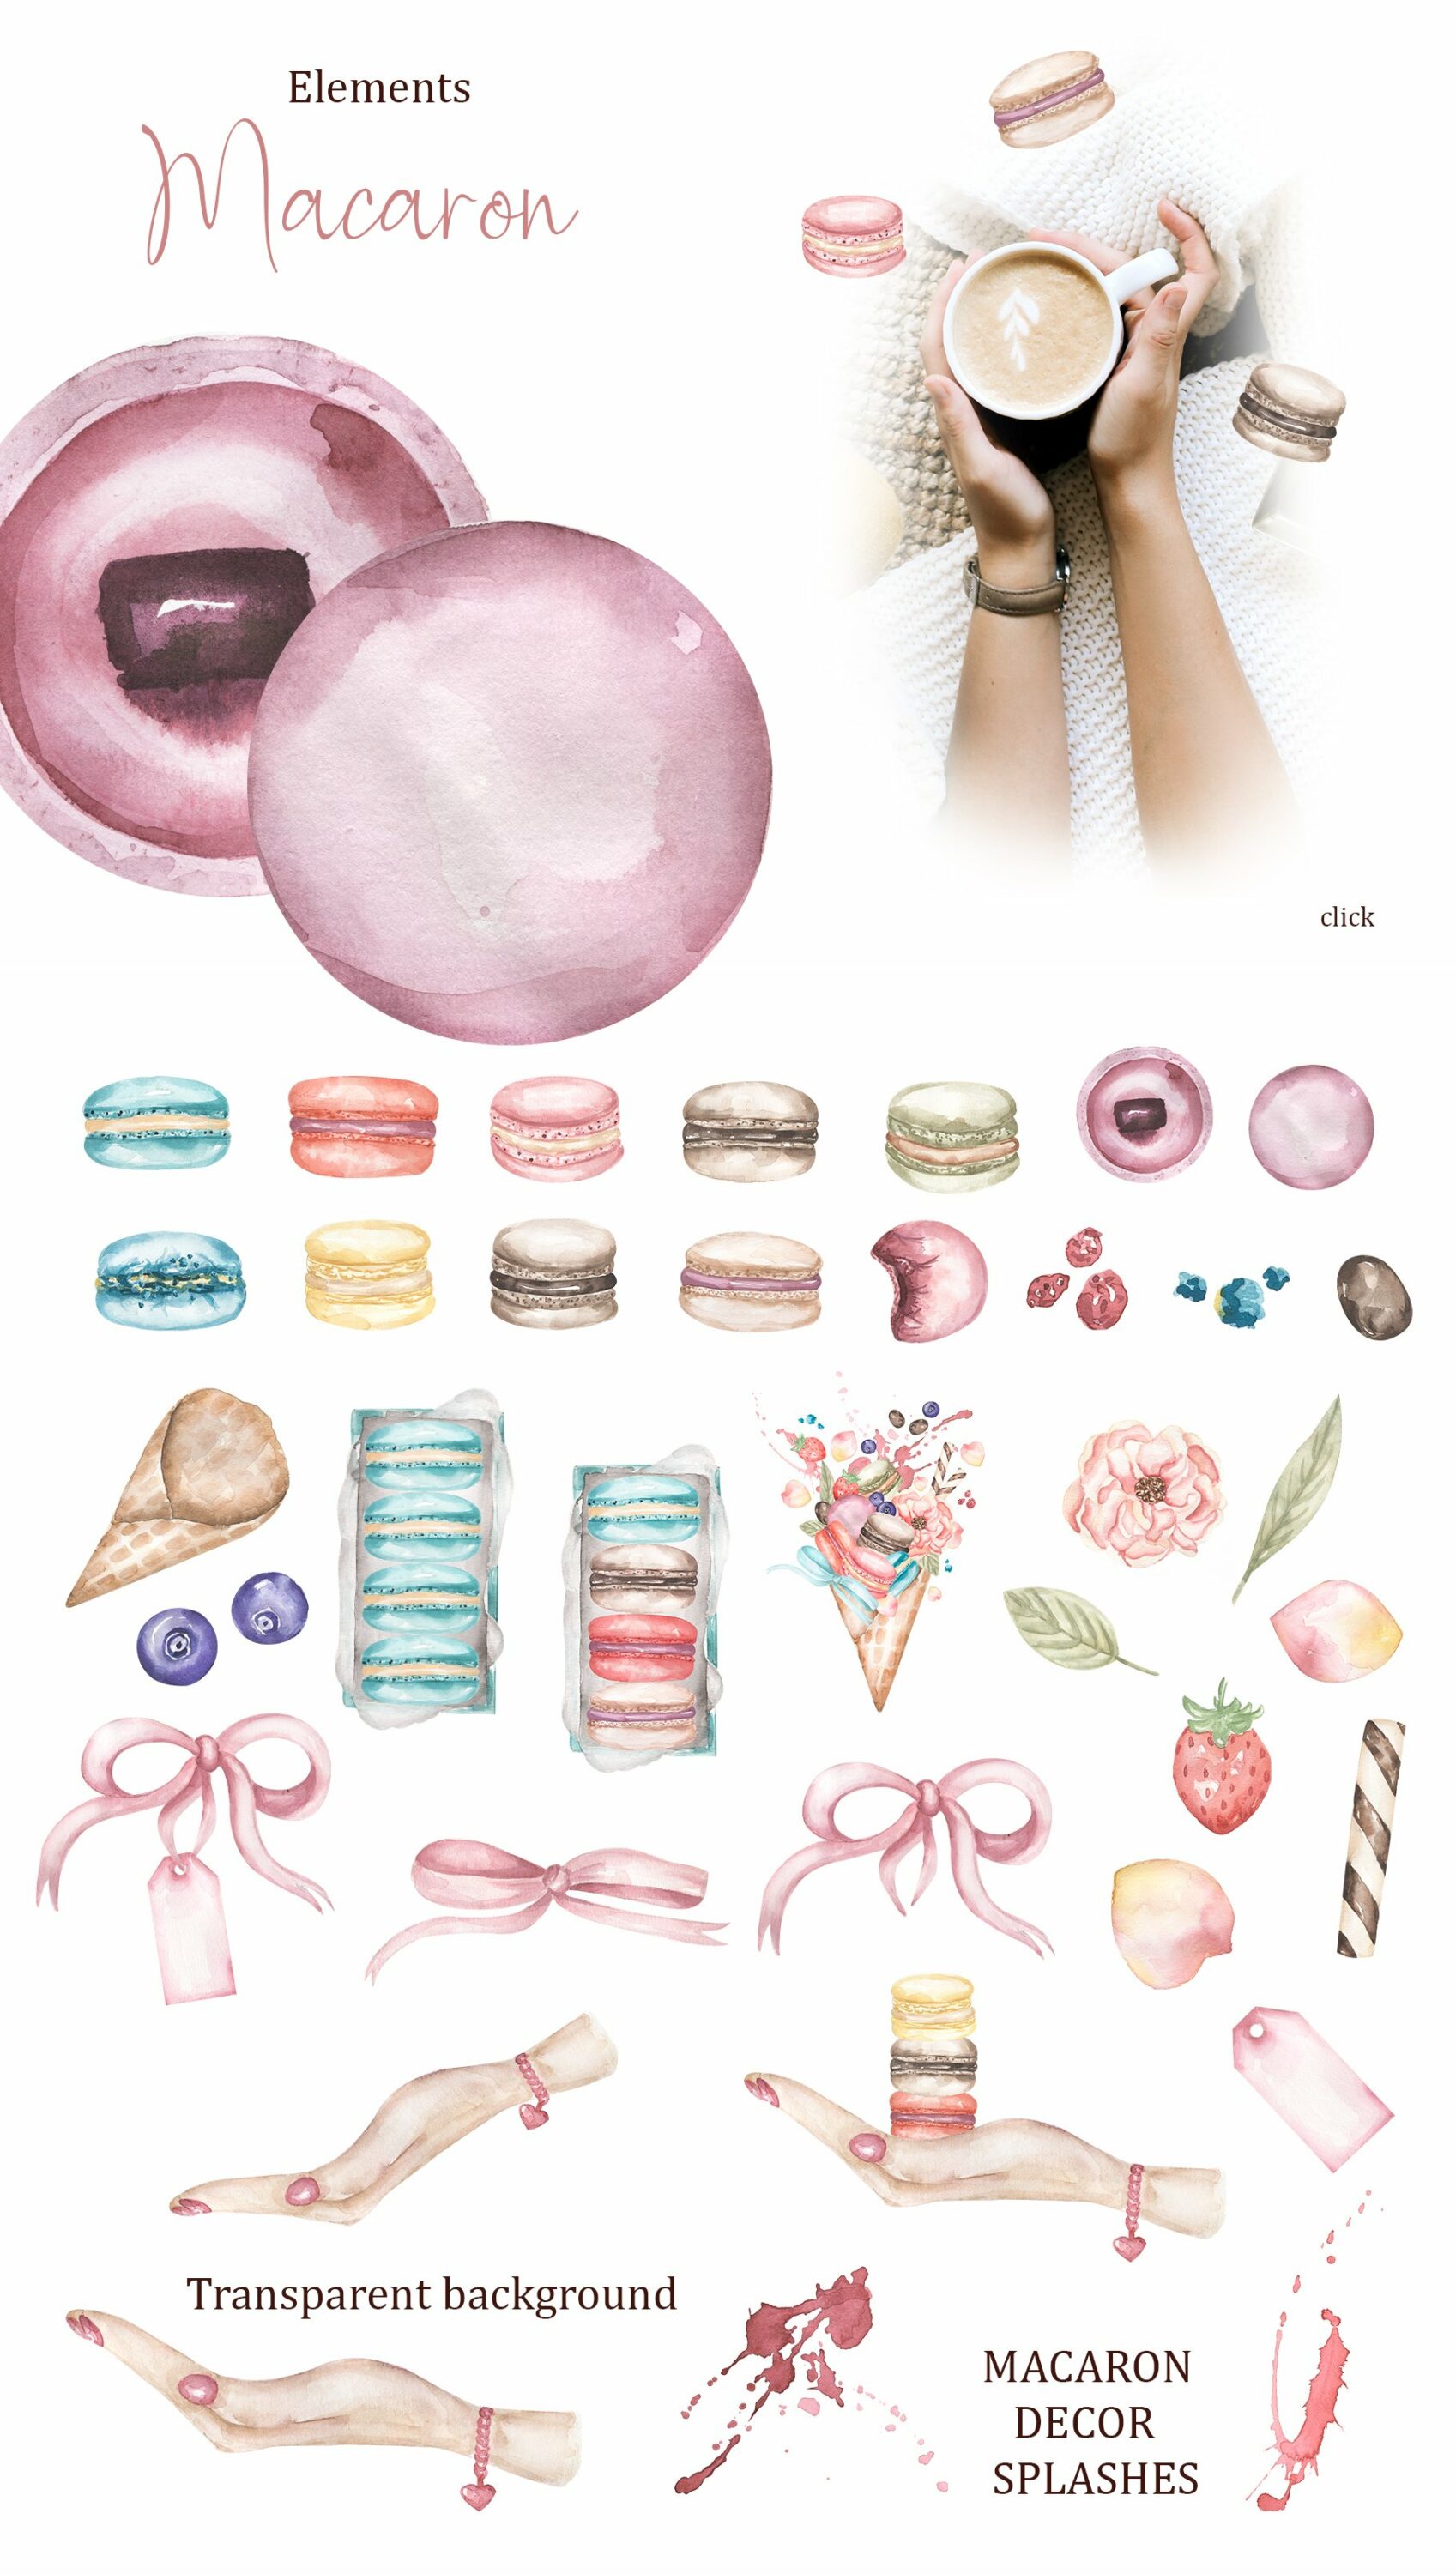 Some delicate elements for full macaroon composition.